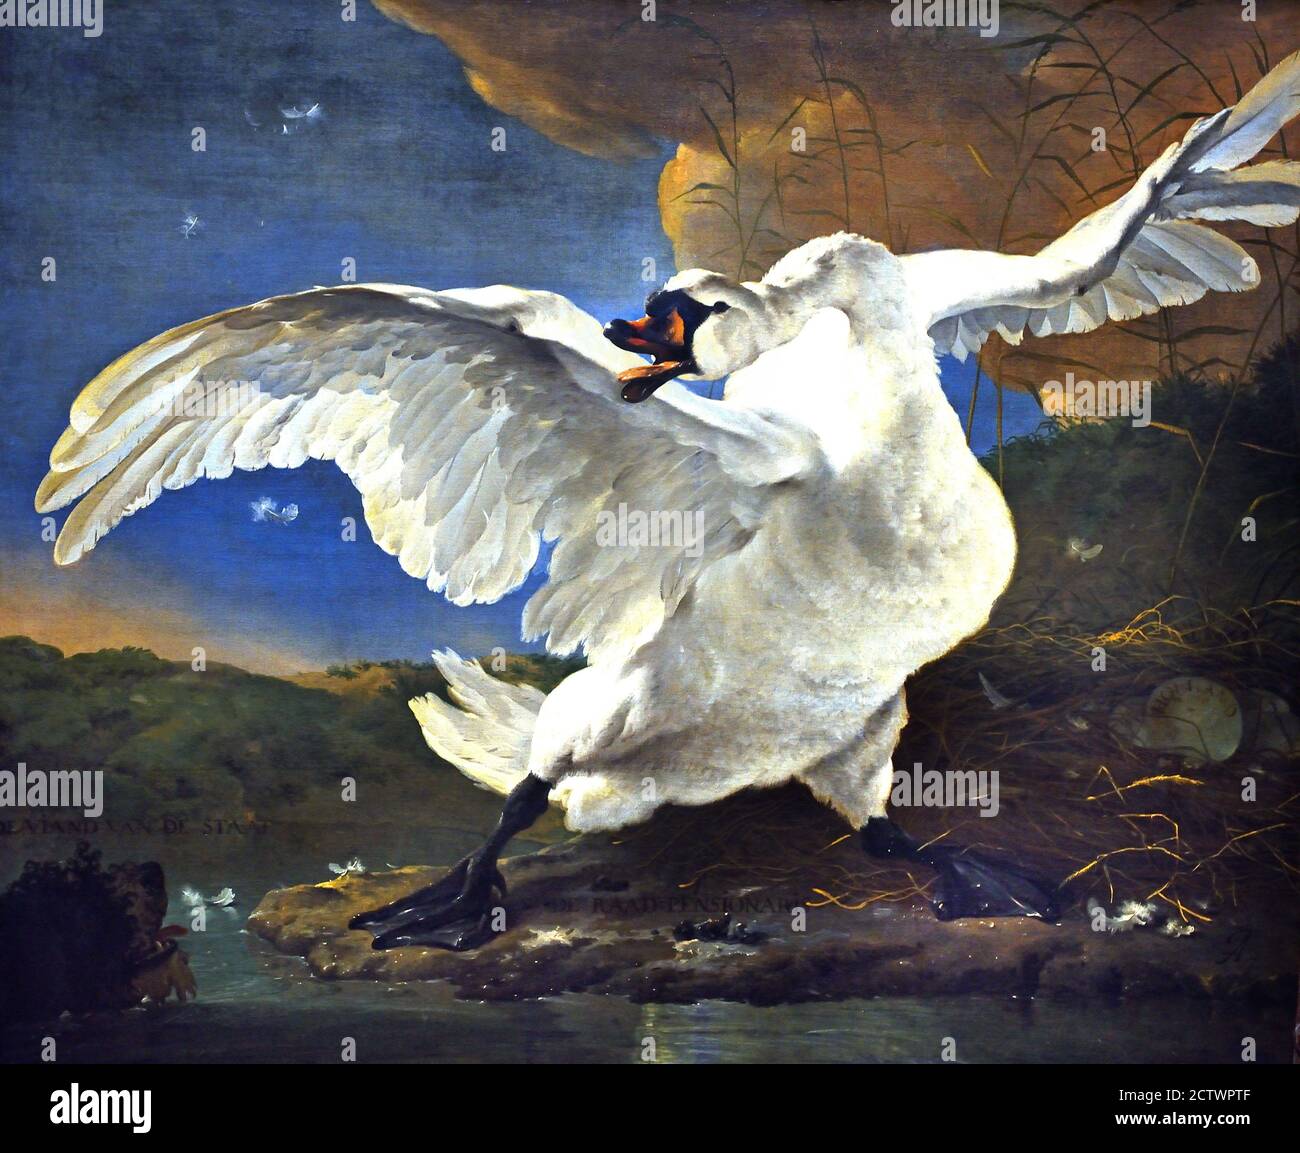 The threatened swan 1650 by Jan Asselijn 1615-1652 Dutch The Netherlands ( Swan  defends its nest against a dog. The white swan was conceived as the statesman Johan de Witt, who was murdered in 1672 and who defends the country against his enemies. ) Stock Photo